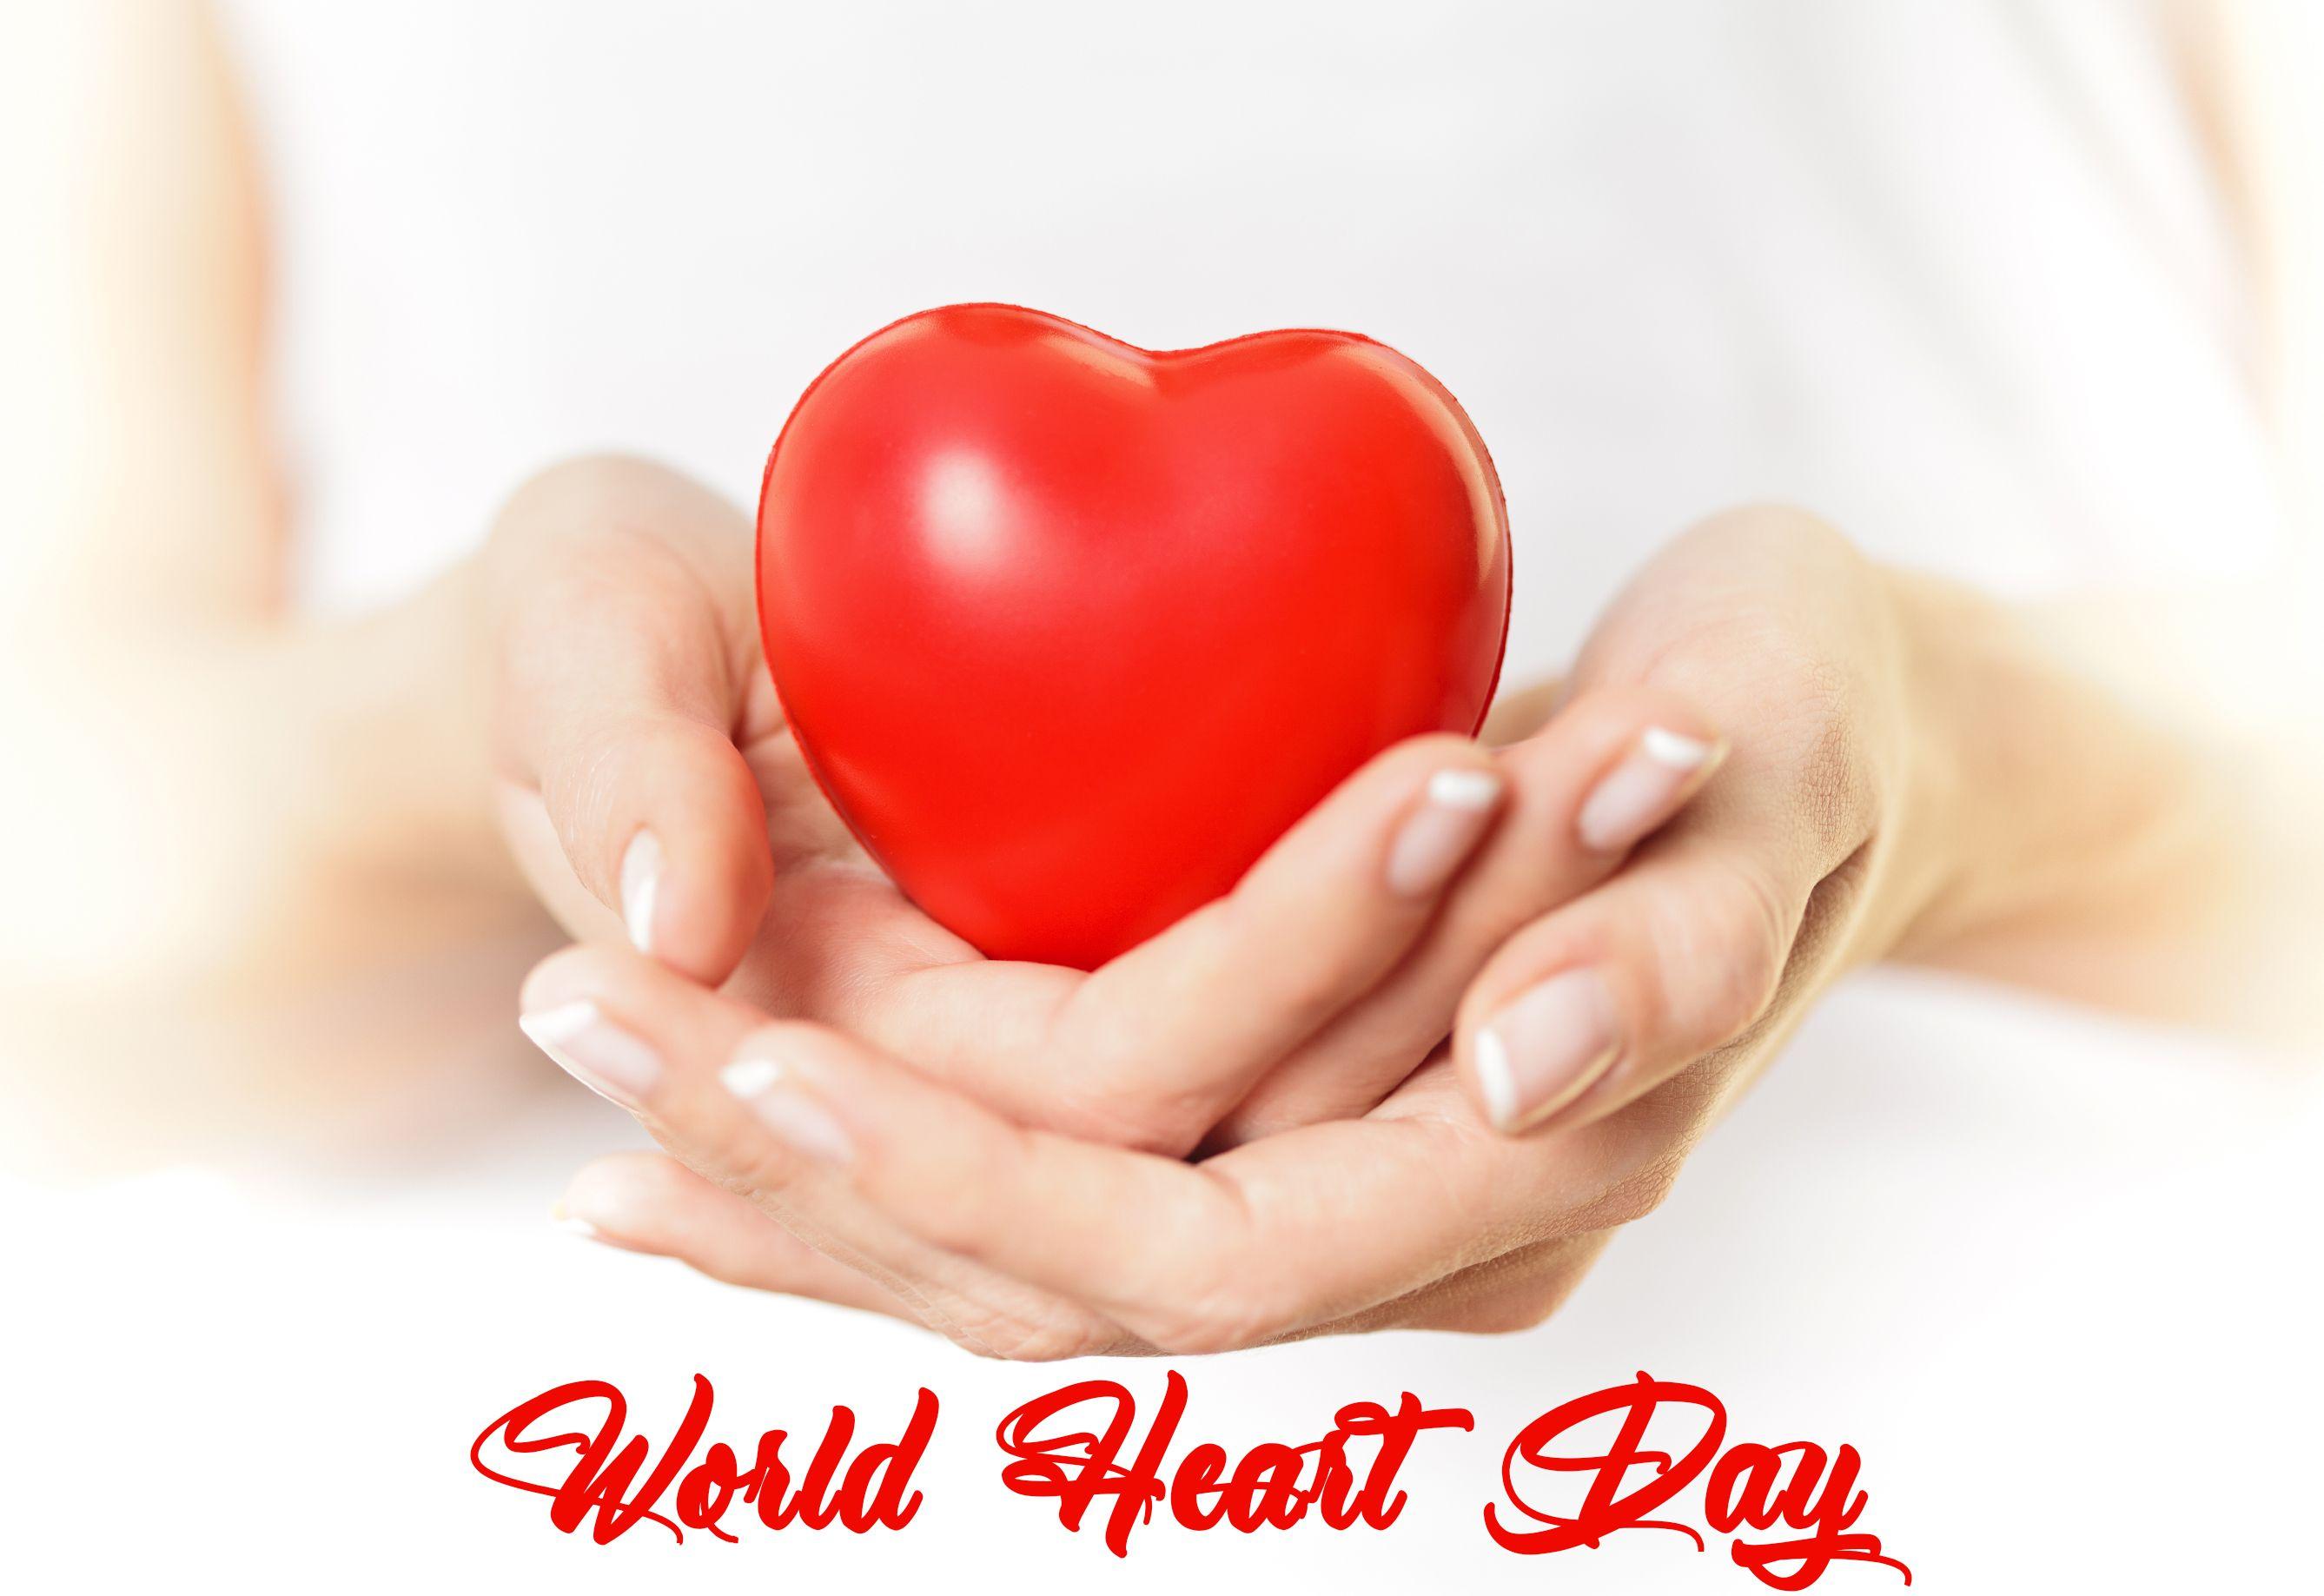 World heart day wallpapers